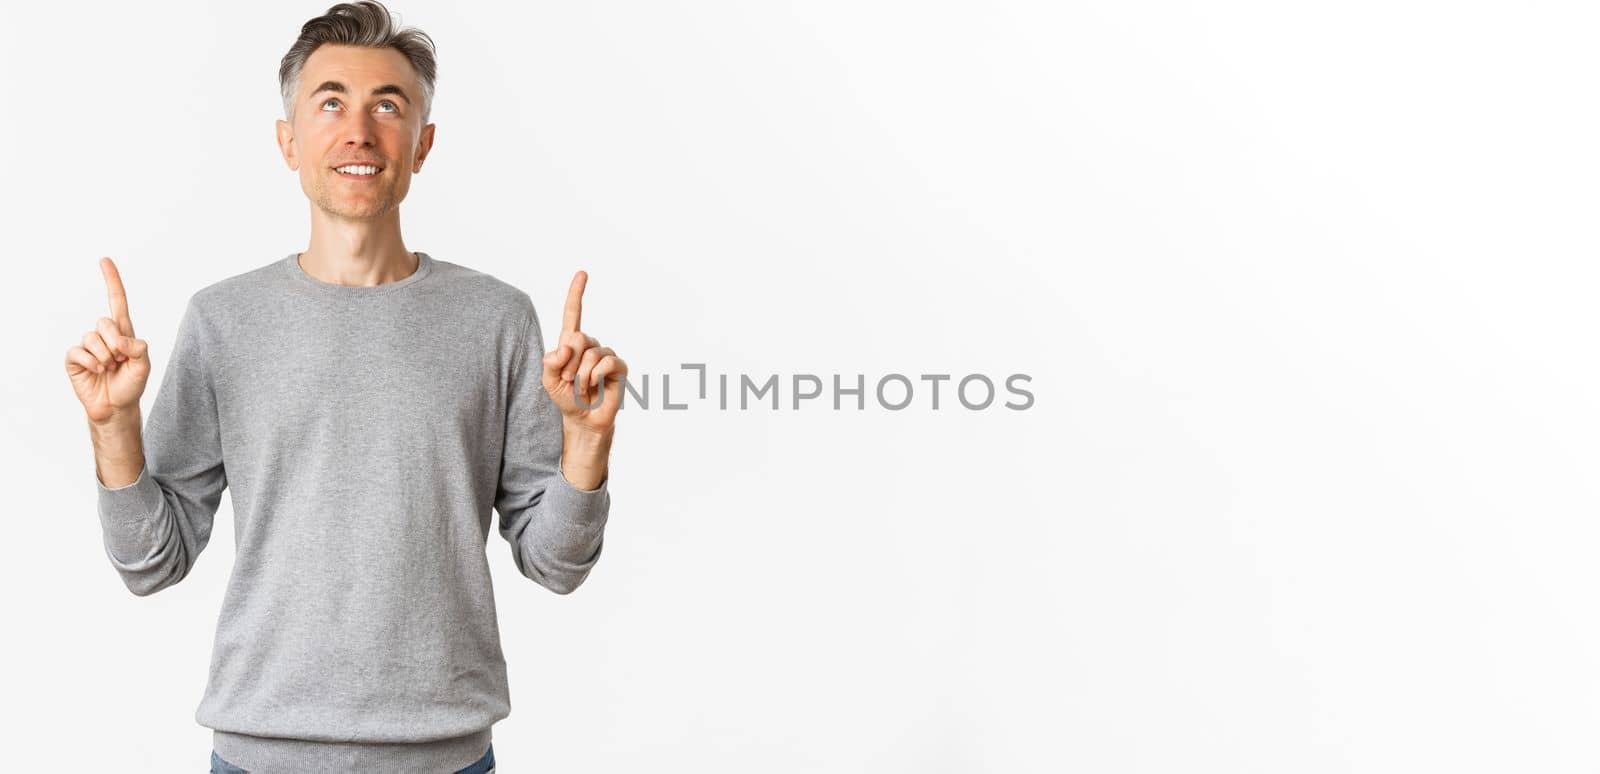 Portrait of smiling handsome man with short hair hair, looking and pointing fingers up at something interesting, reading an advertisement, standing over white background.